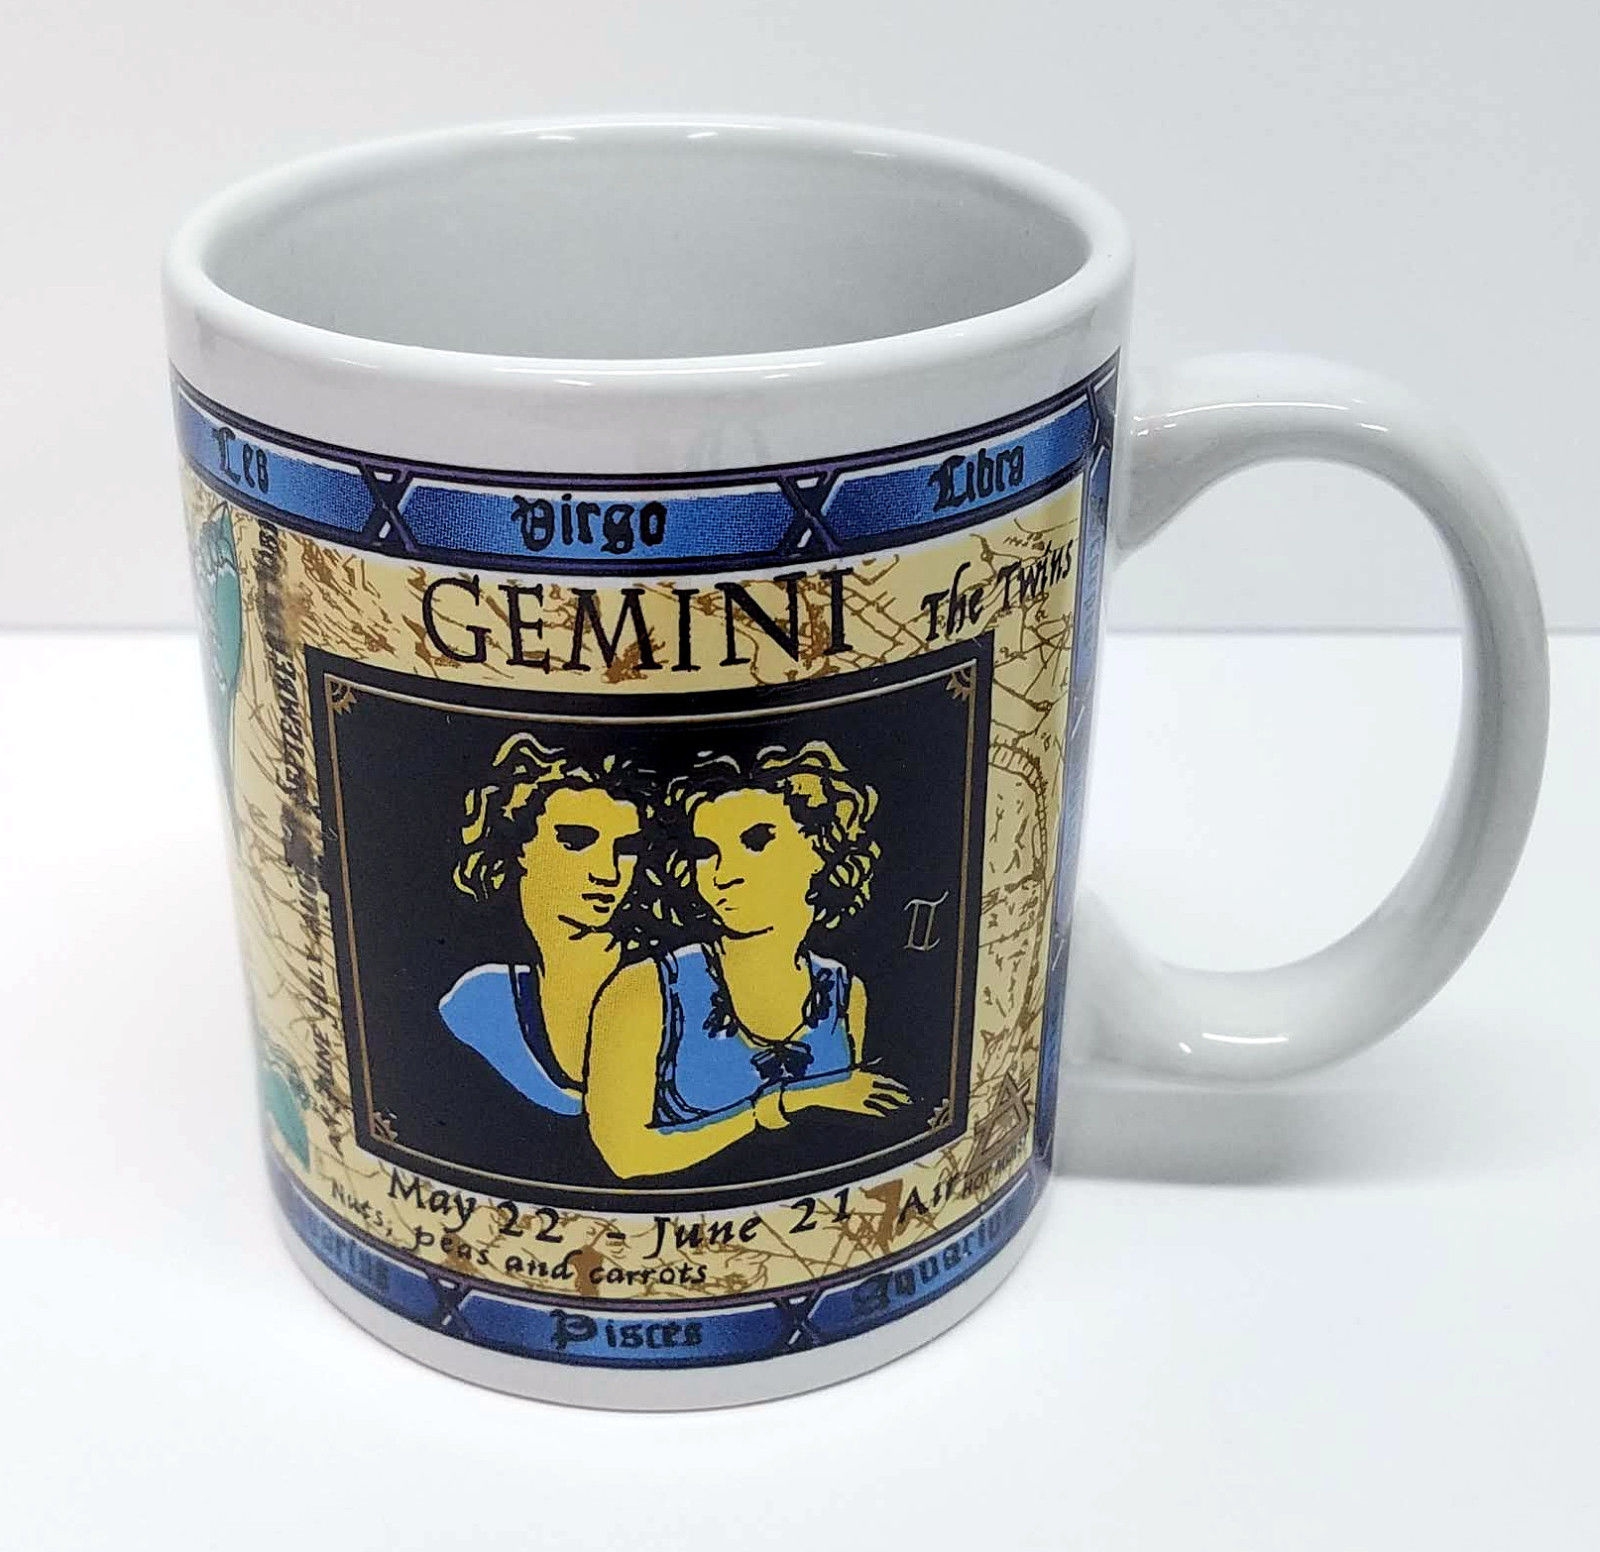 This Gemini Zodiac Chinese Astrology Coffee or Tea Mug Cup Décor 12 oz 341ml 2 Sided is made with love by Premier Homegoods! Shop more unique gift ideas today with Spots Initiatives, the best way to support creators.